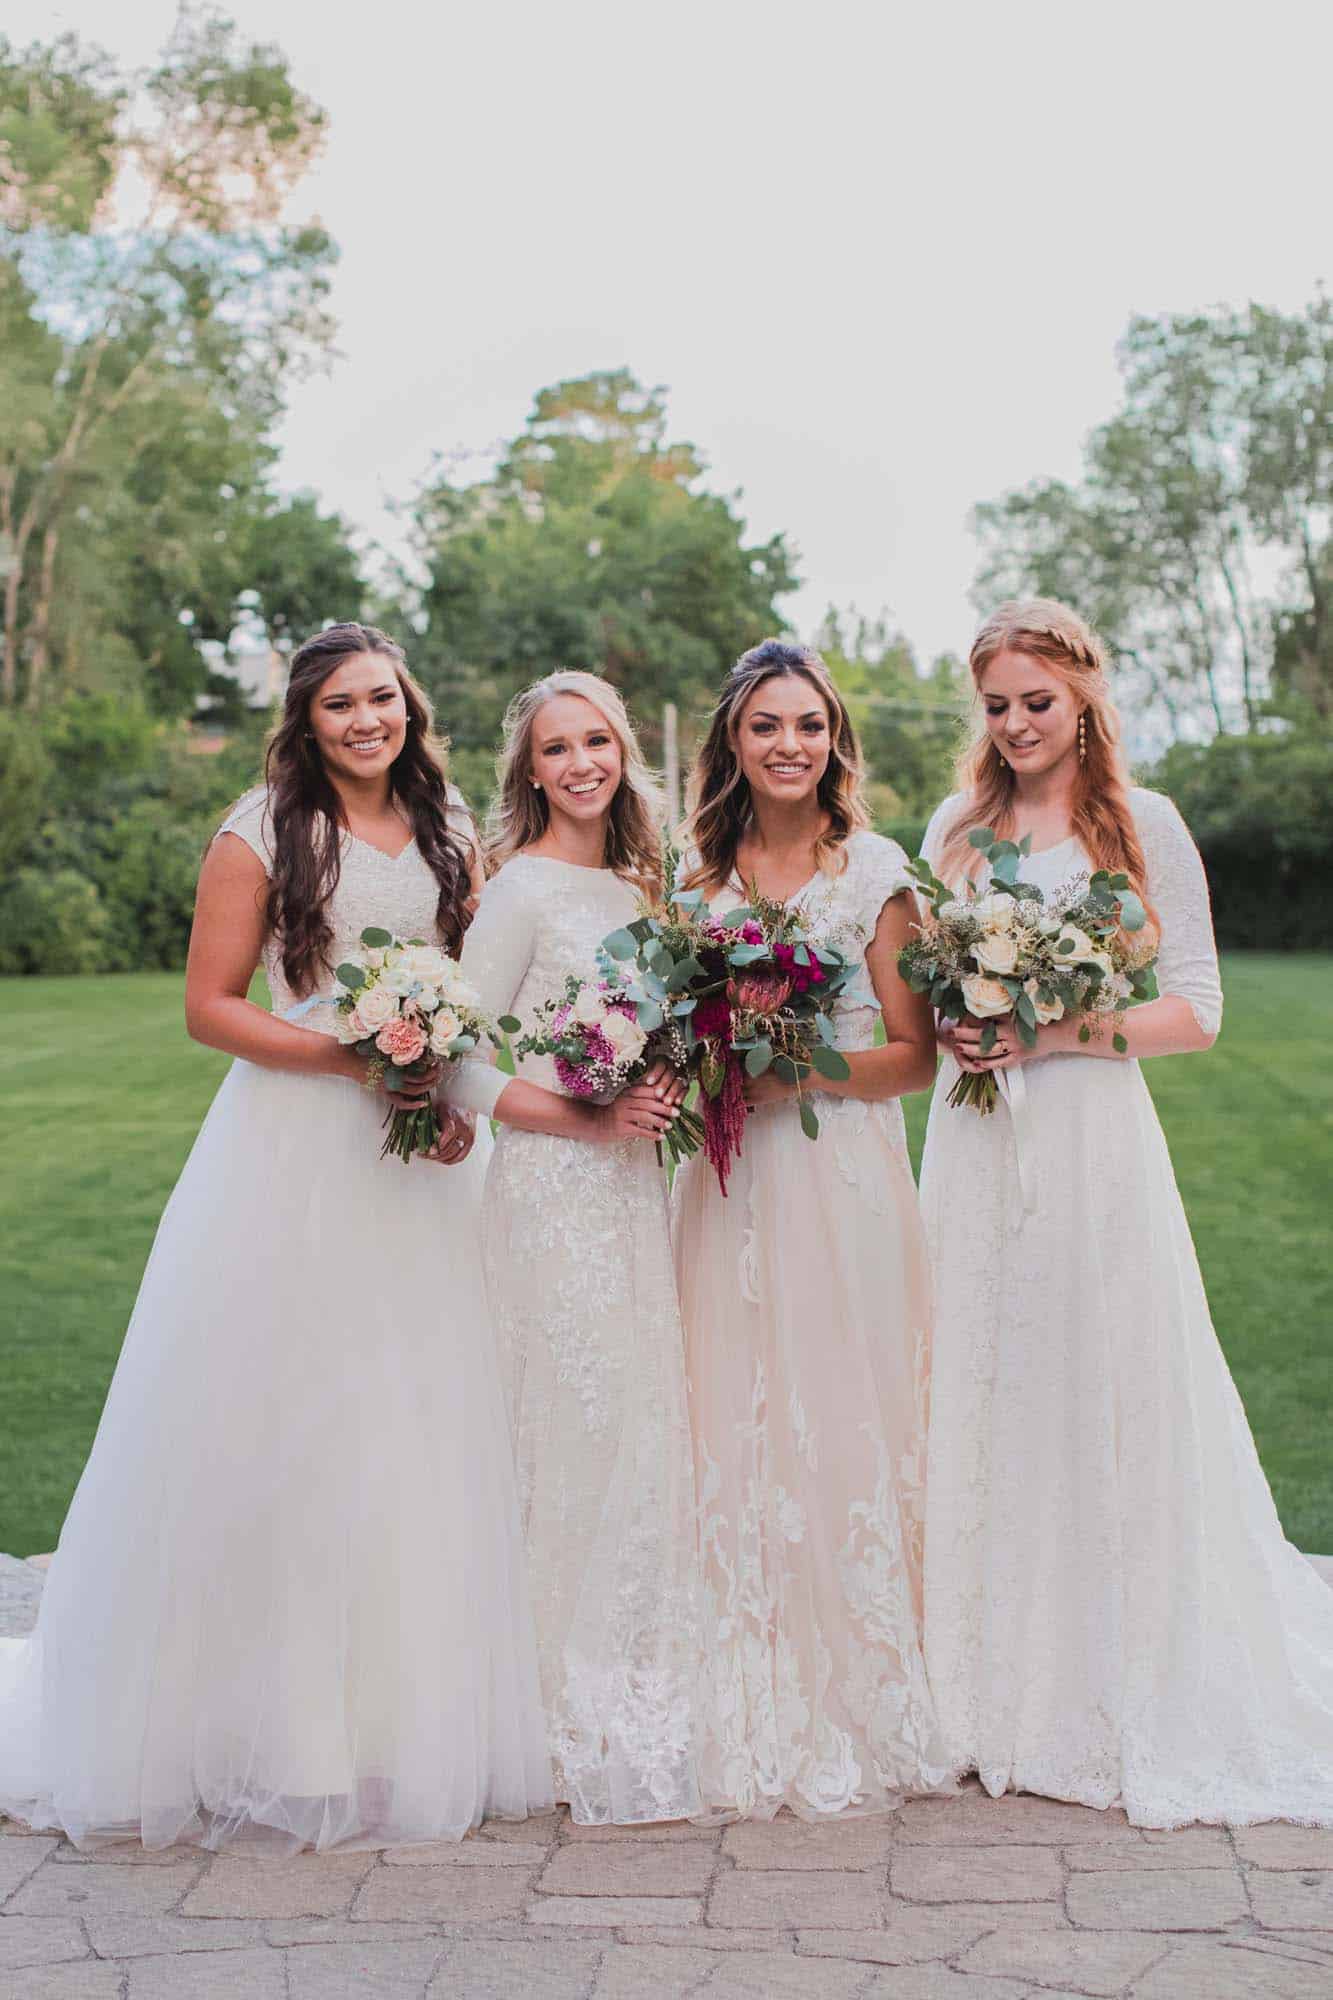 Bride's 4 flower girls wearing modest wedding dresses while holding bouquet of flowers